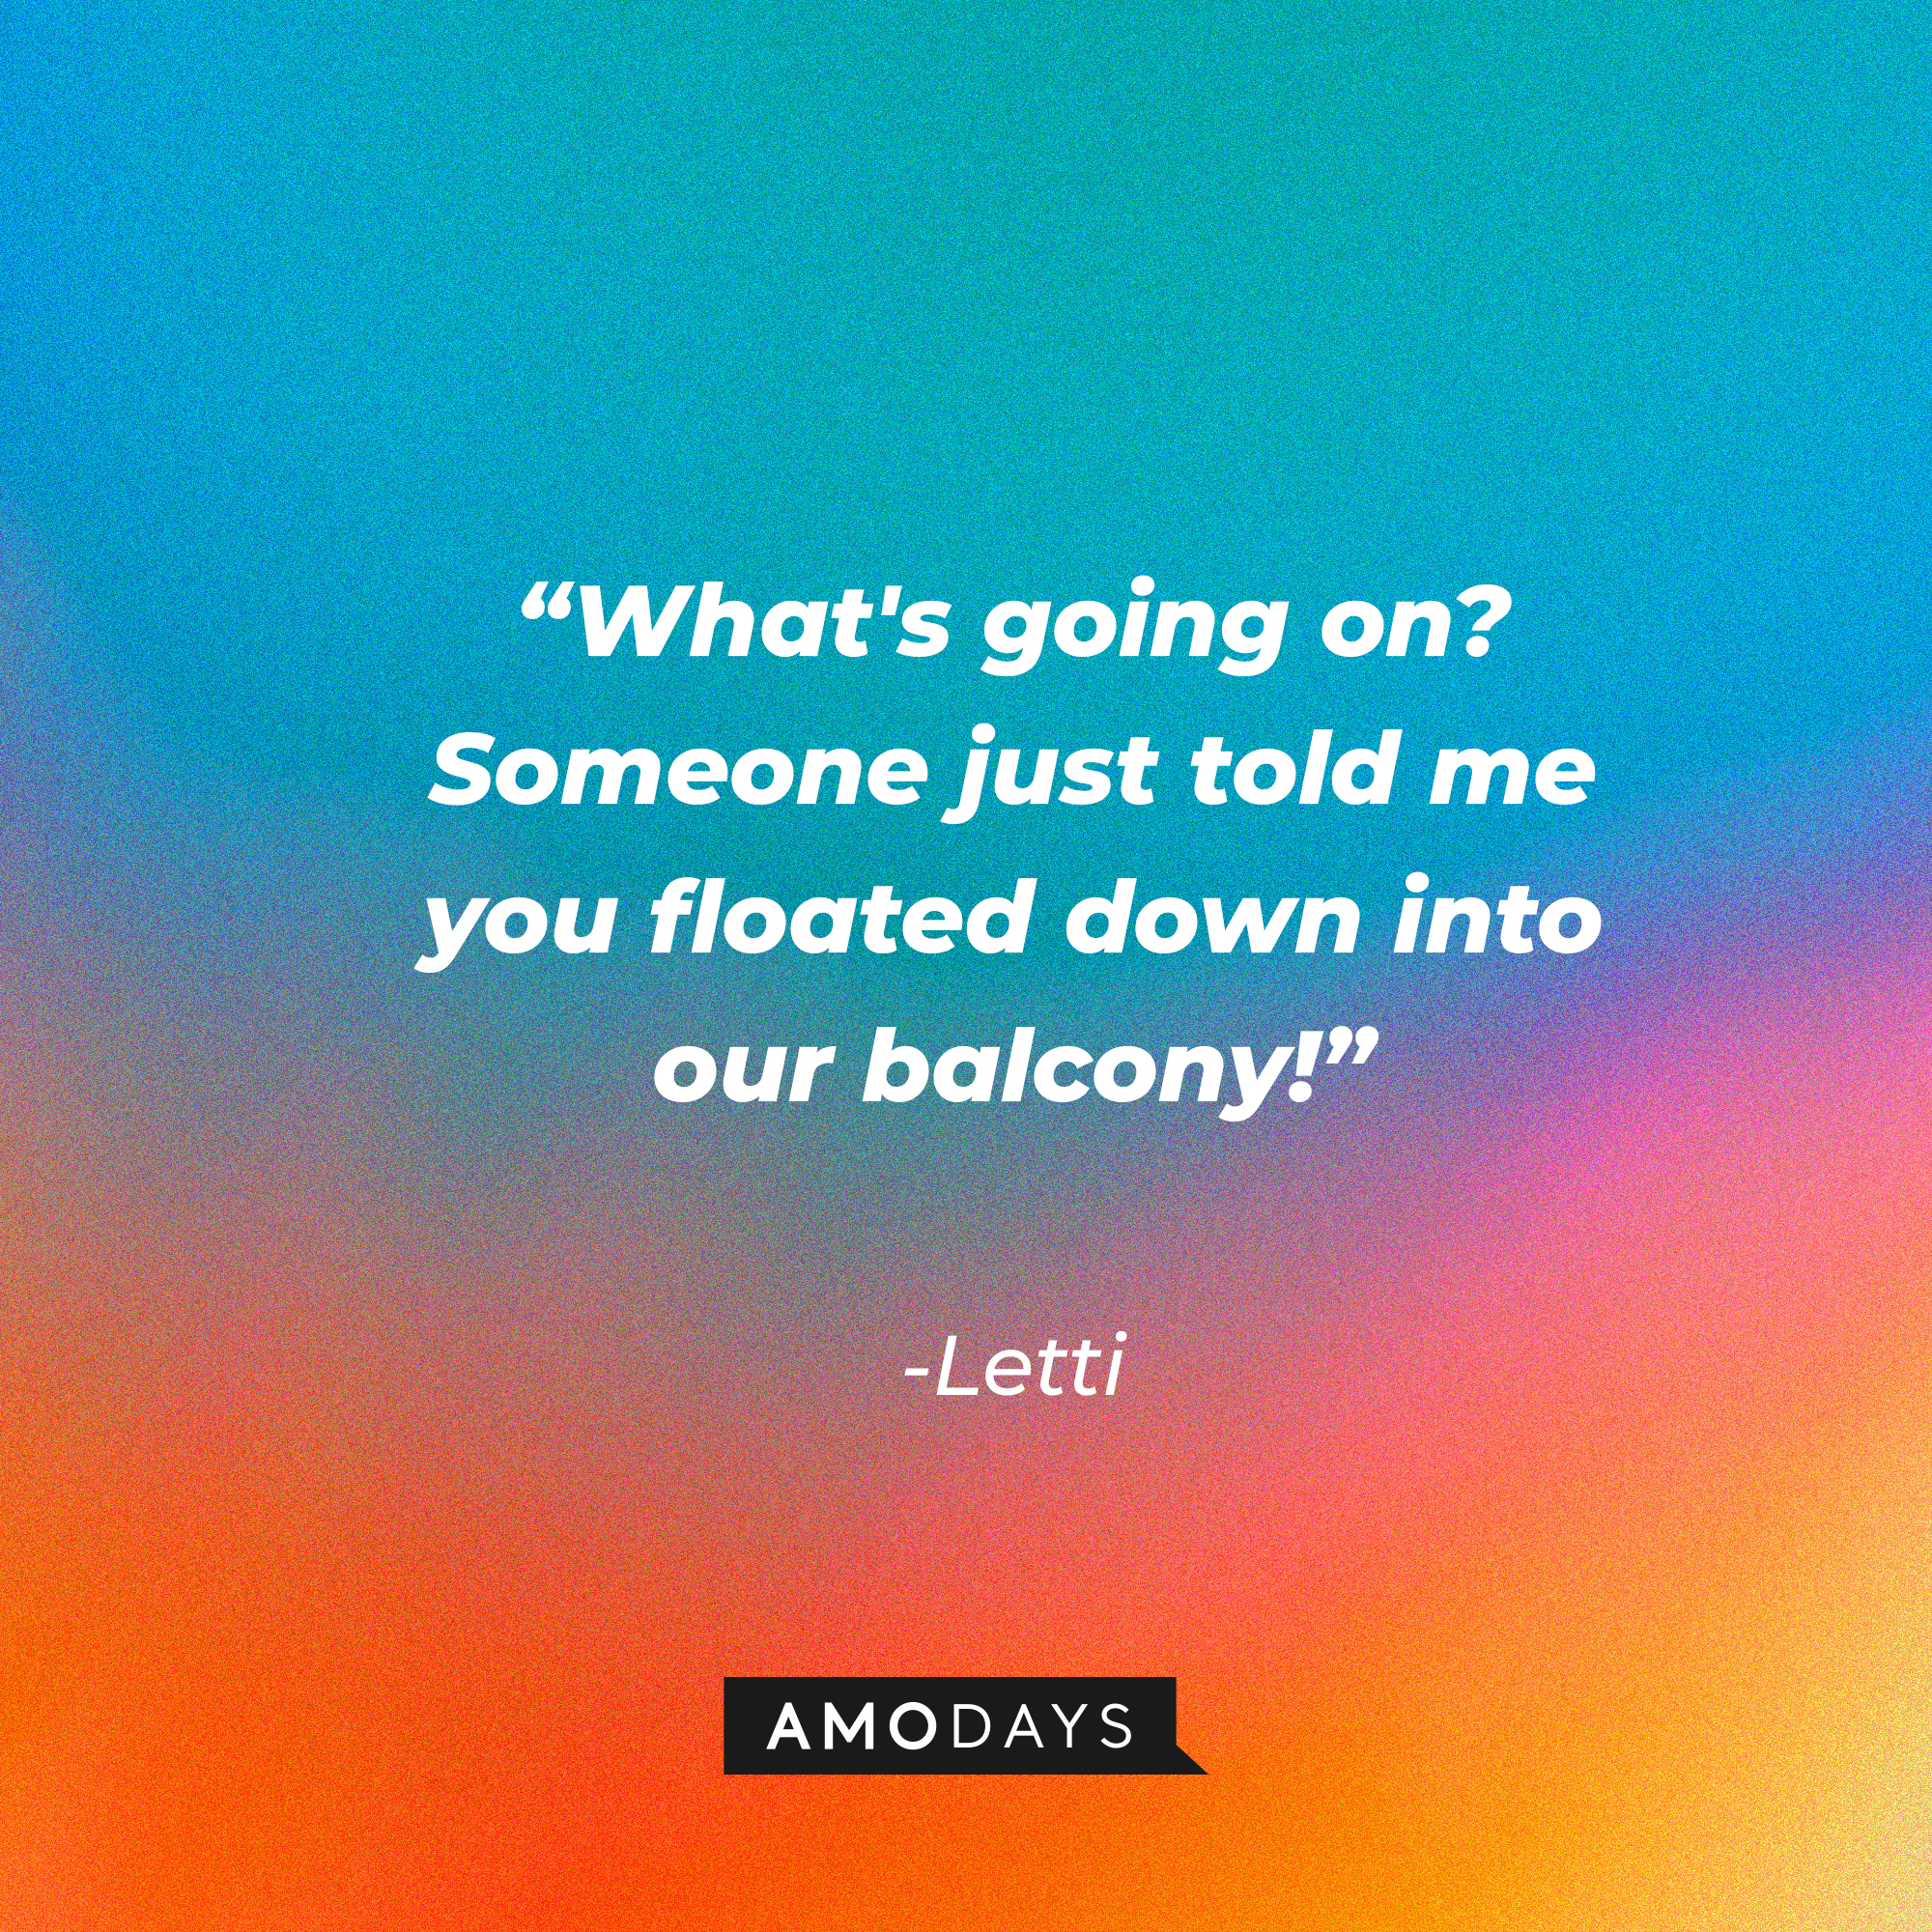 Letti’s quote: “What's going on? Someone just told me you floated down into our balcony!” | Source: AmoDays